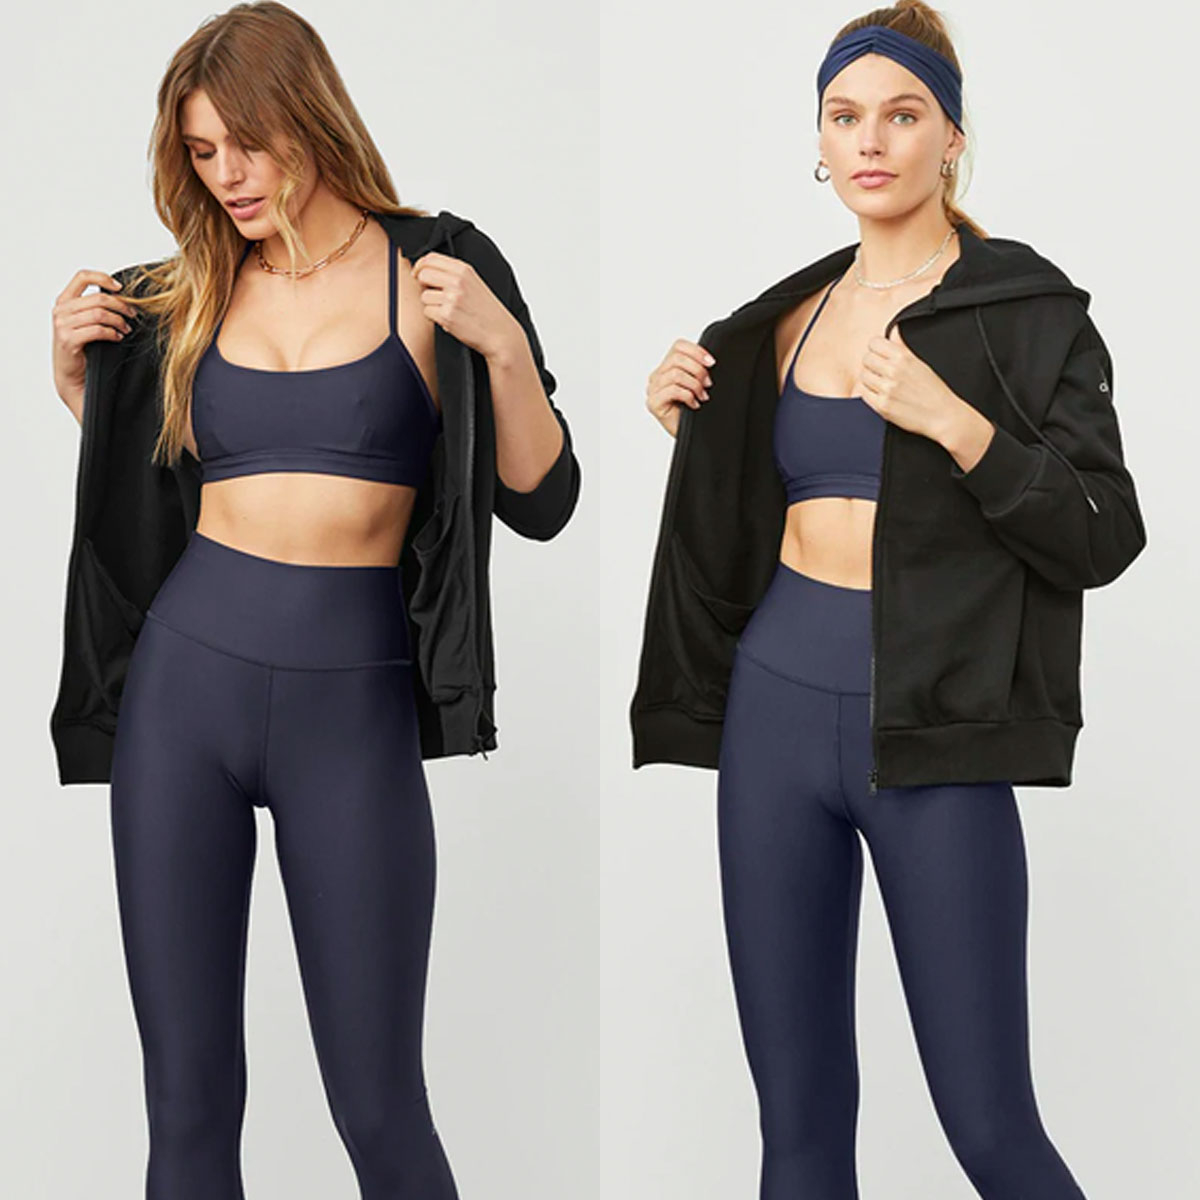 Save 50% on These Alo Yoga Leggings With 1,200+ 5-Star Reviews